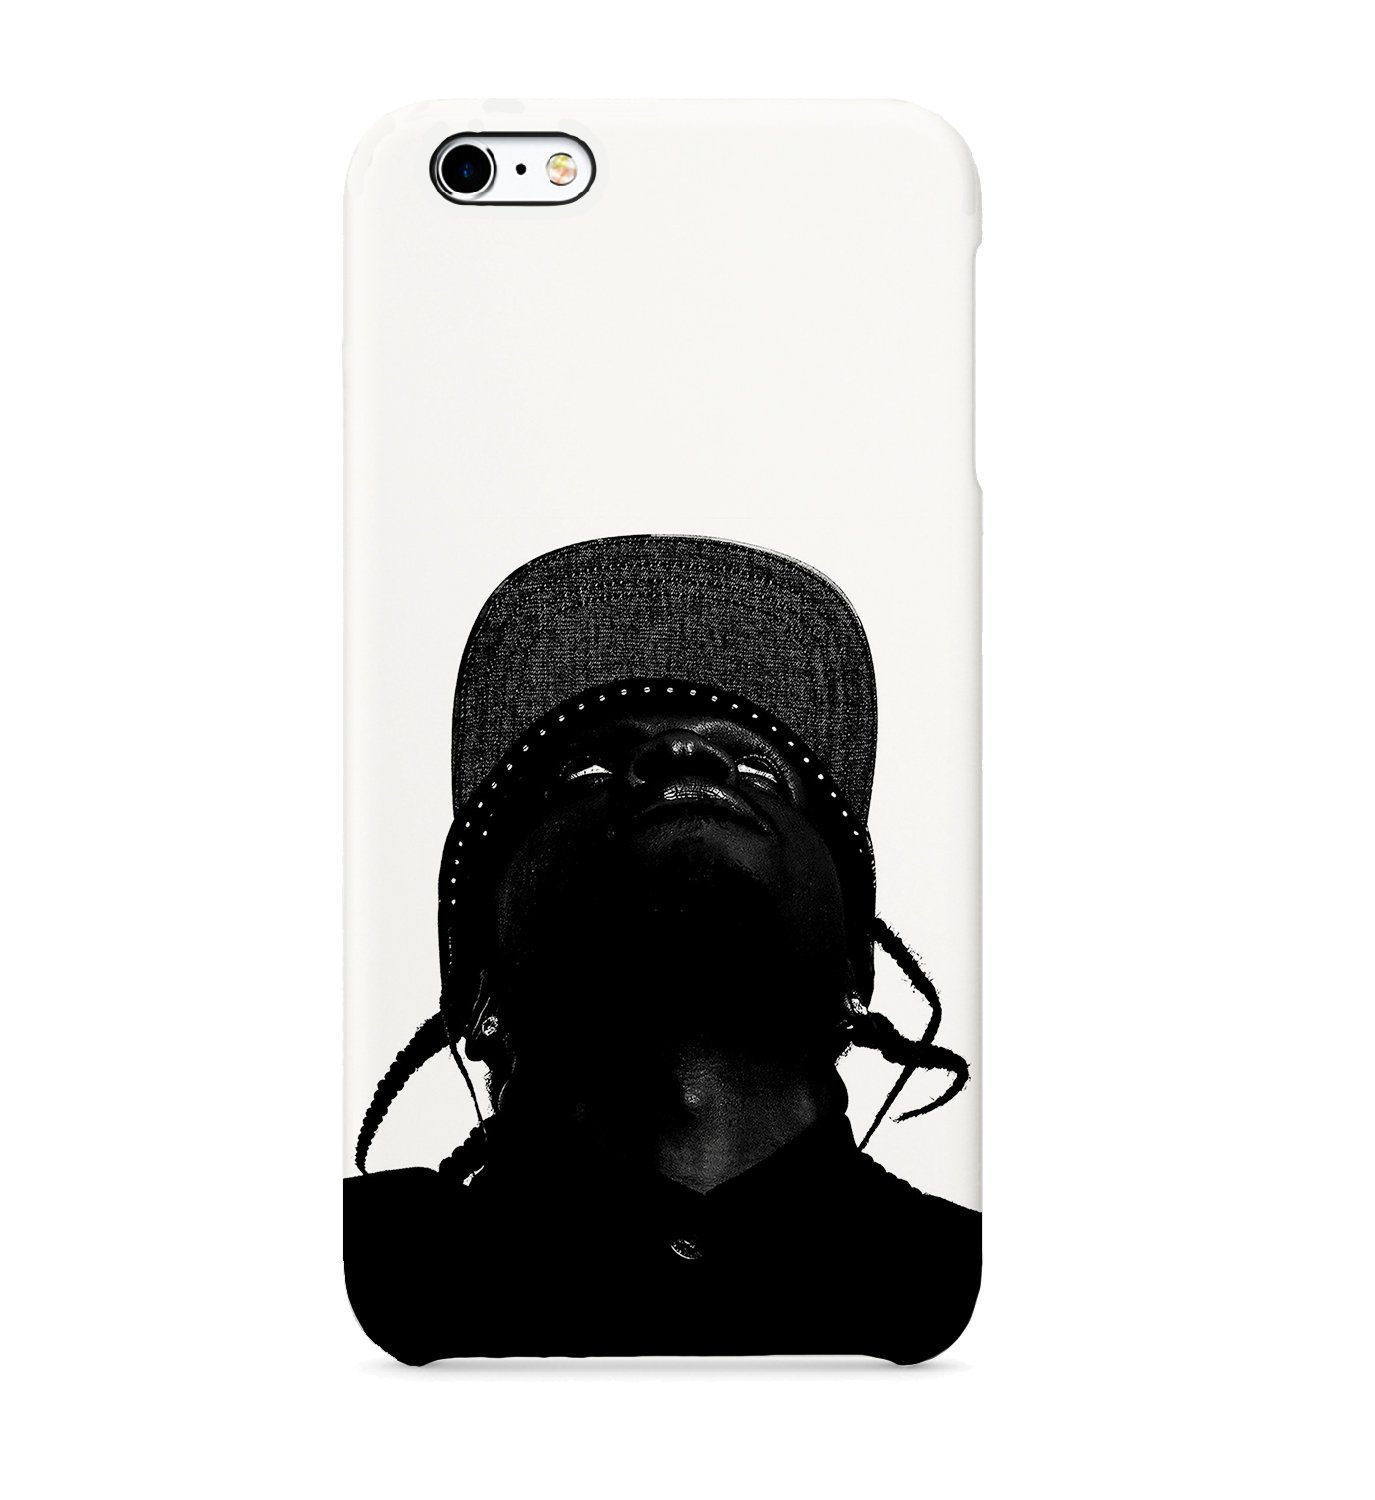 Pusha T Rapper Whtie Background Phone Case Hard Plastic - My Name Is My Name Pusha T Album Cover , HD Wallpaper & Backgrounds